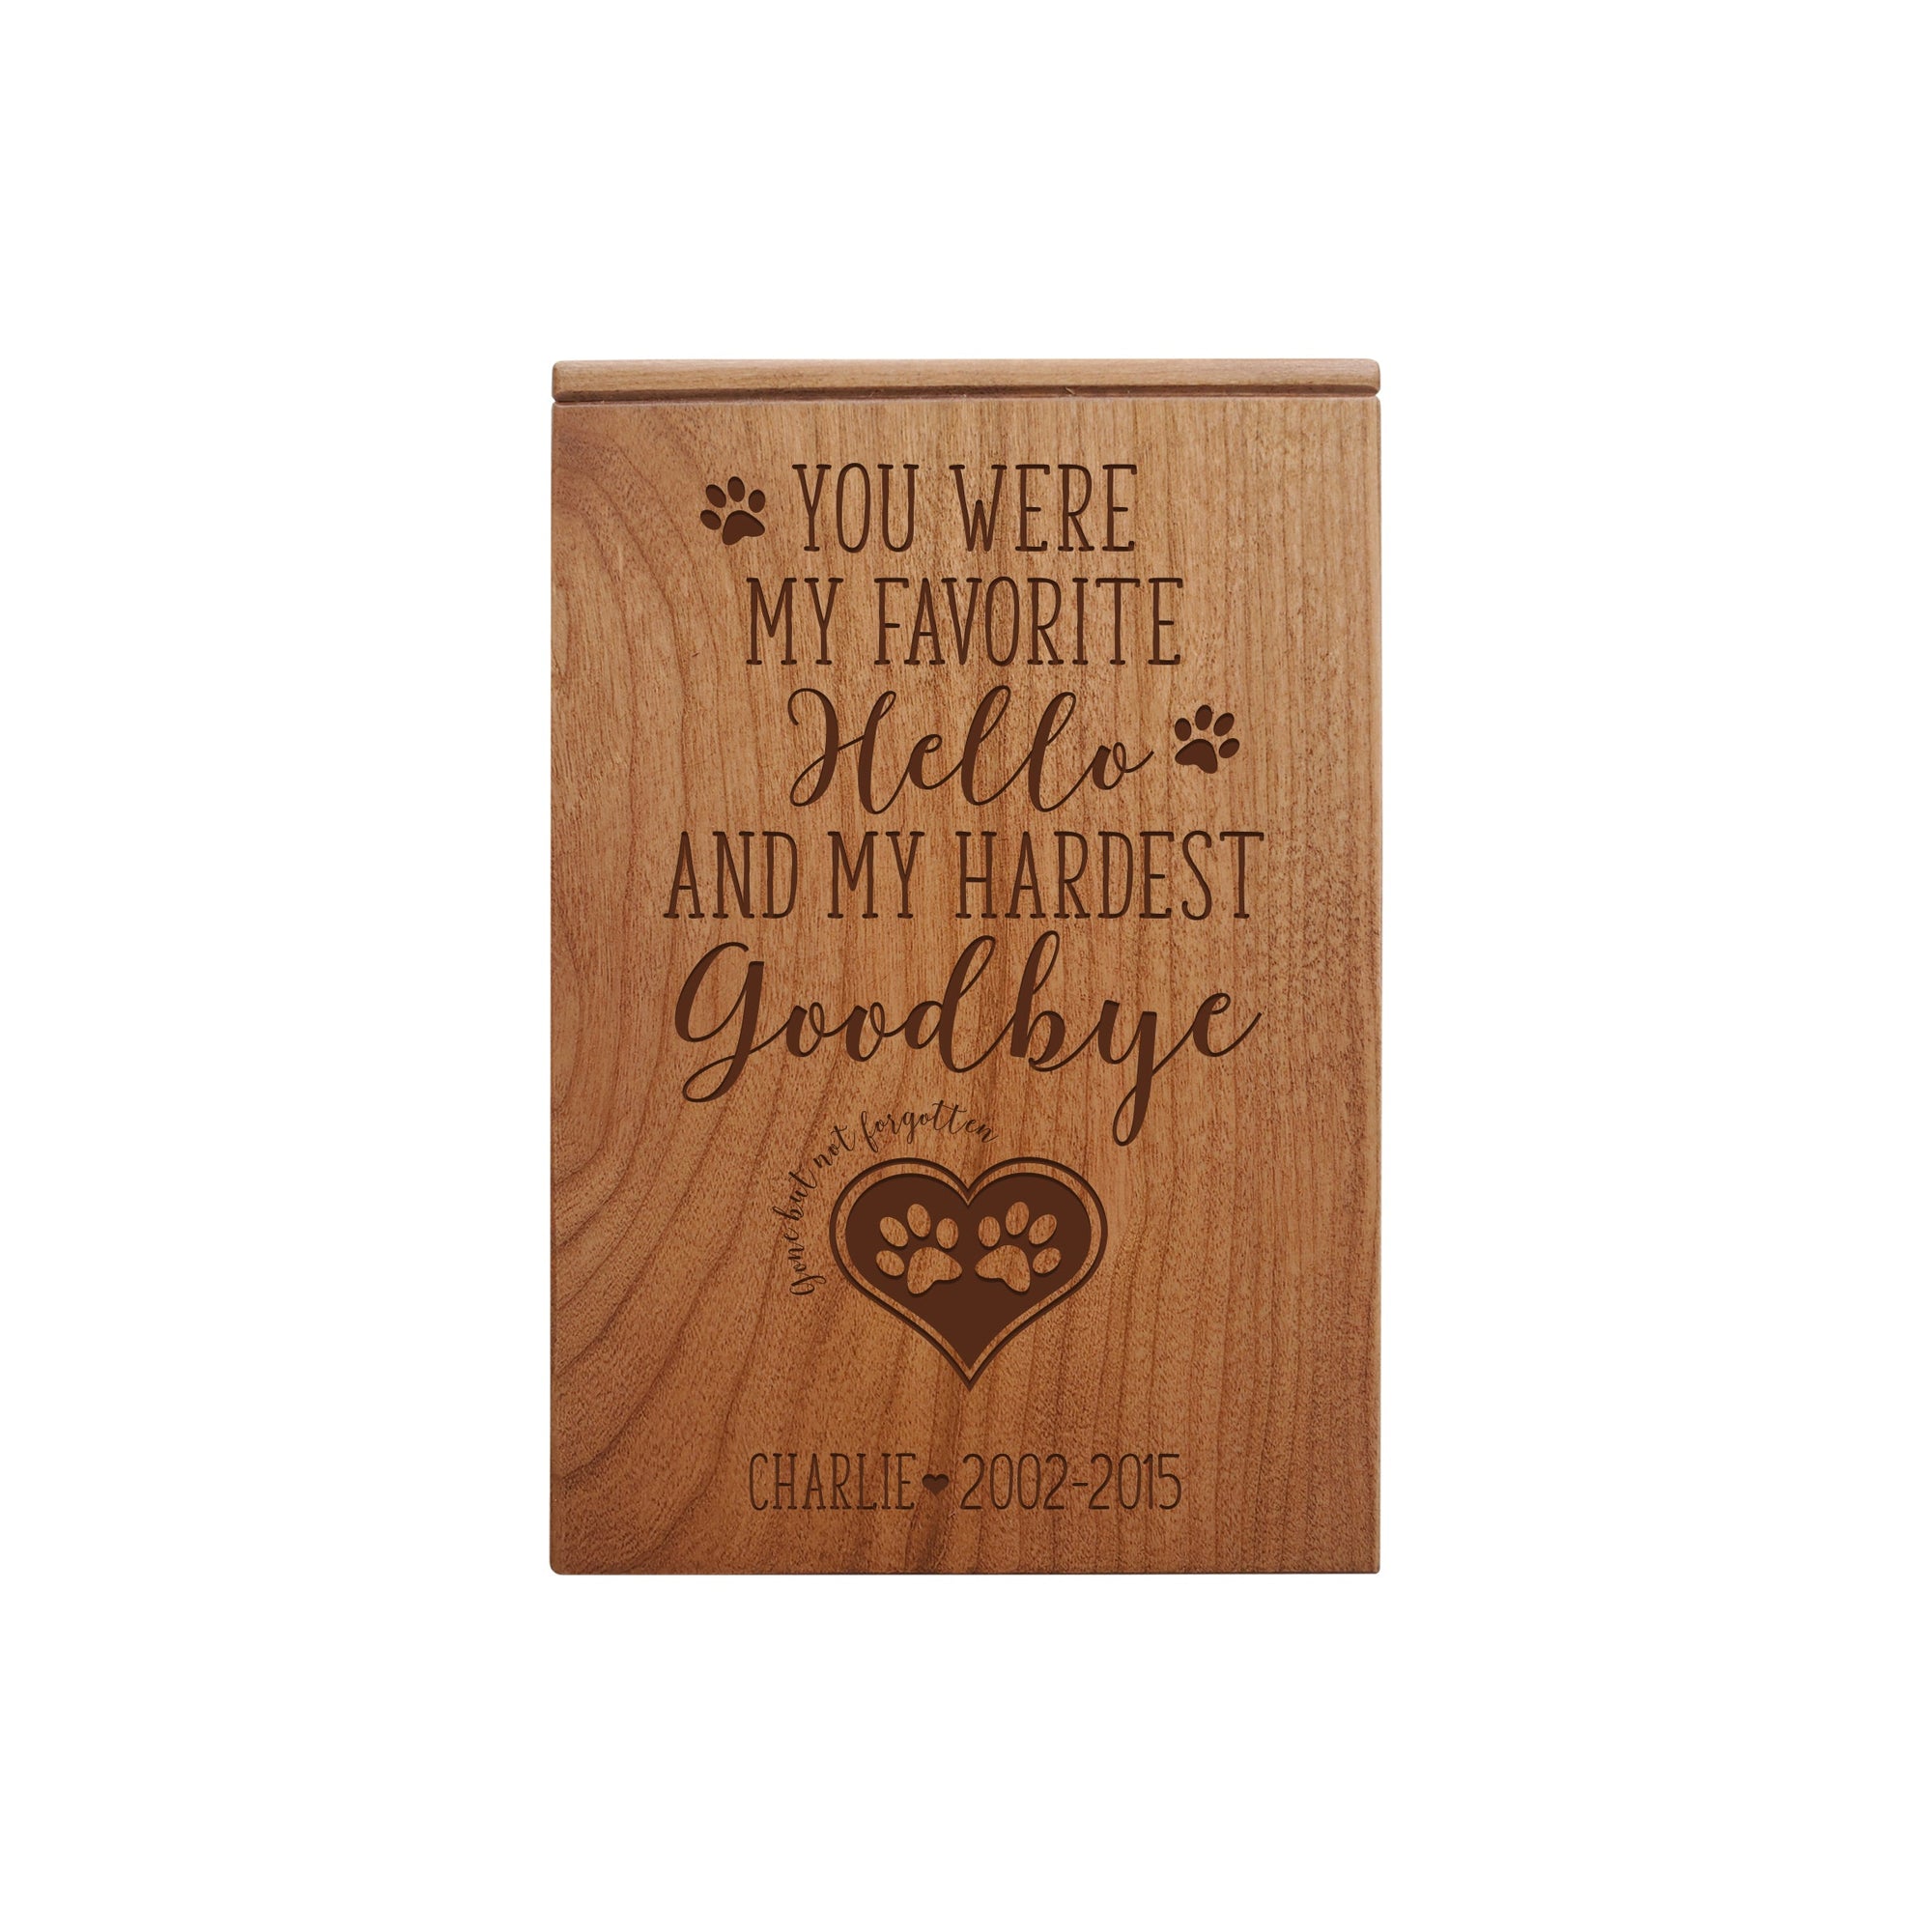 Pet Memorial Keepsake Cremation Urn Box For Dog or Cat - You Were My Favorite Hello